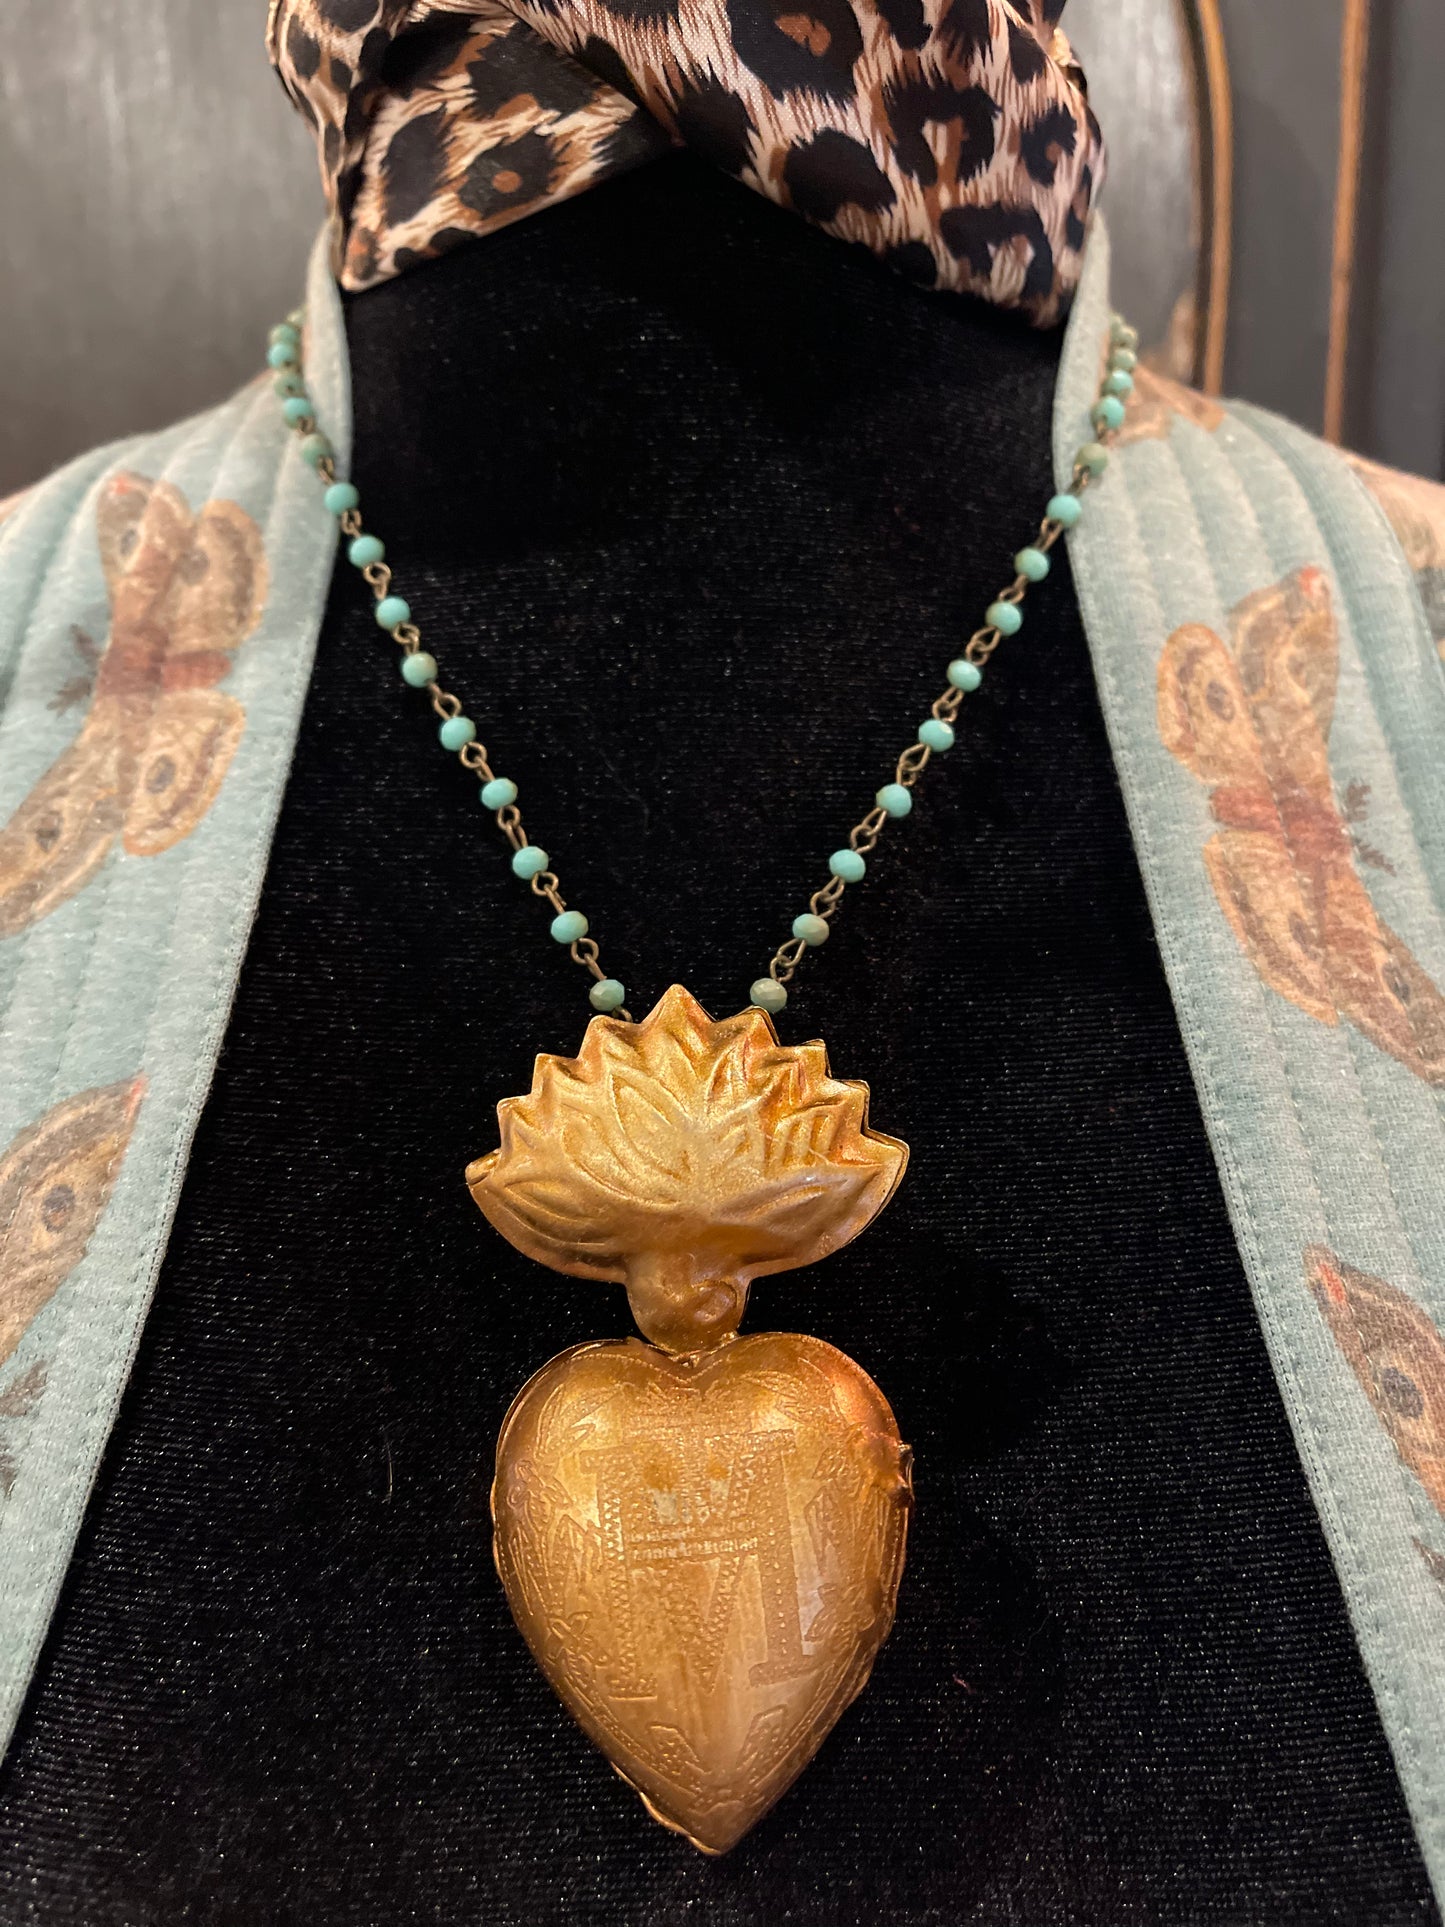 Sacred Heart necklace